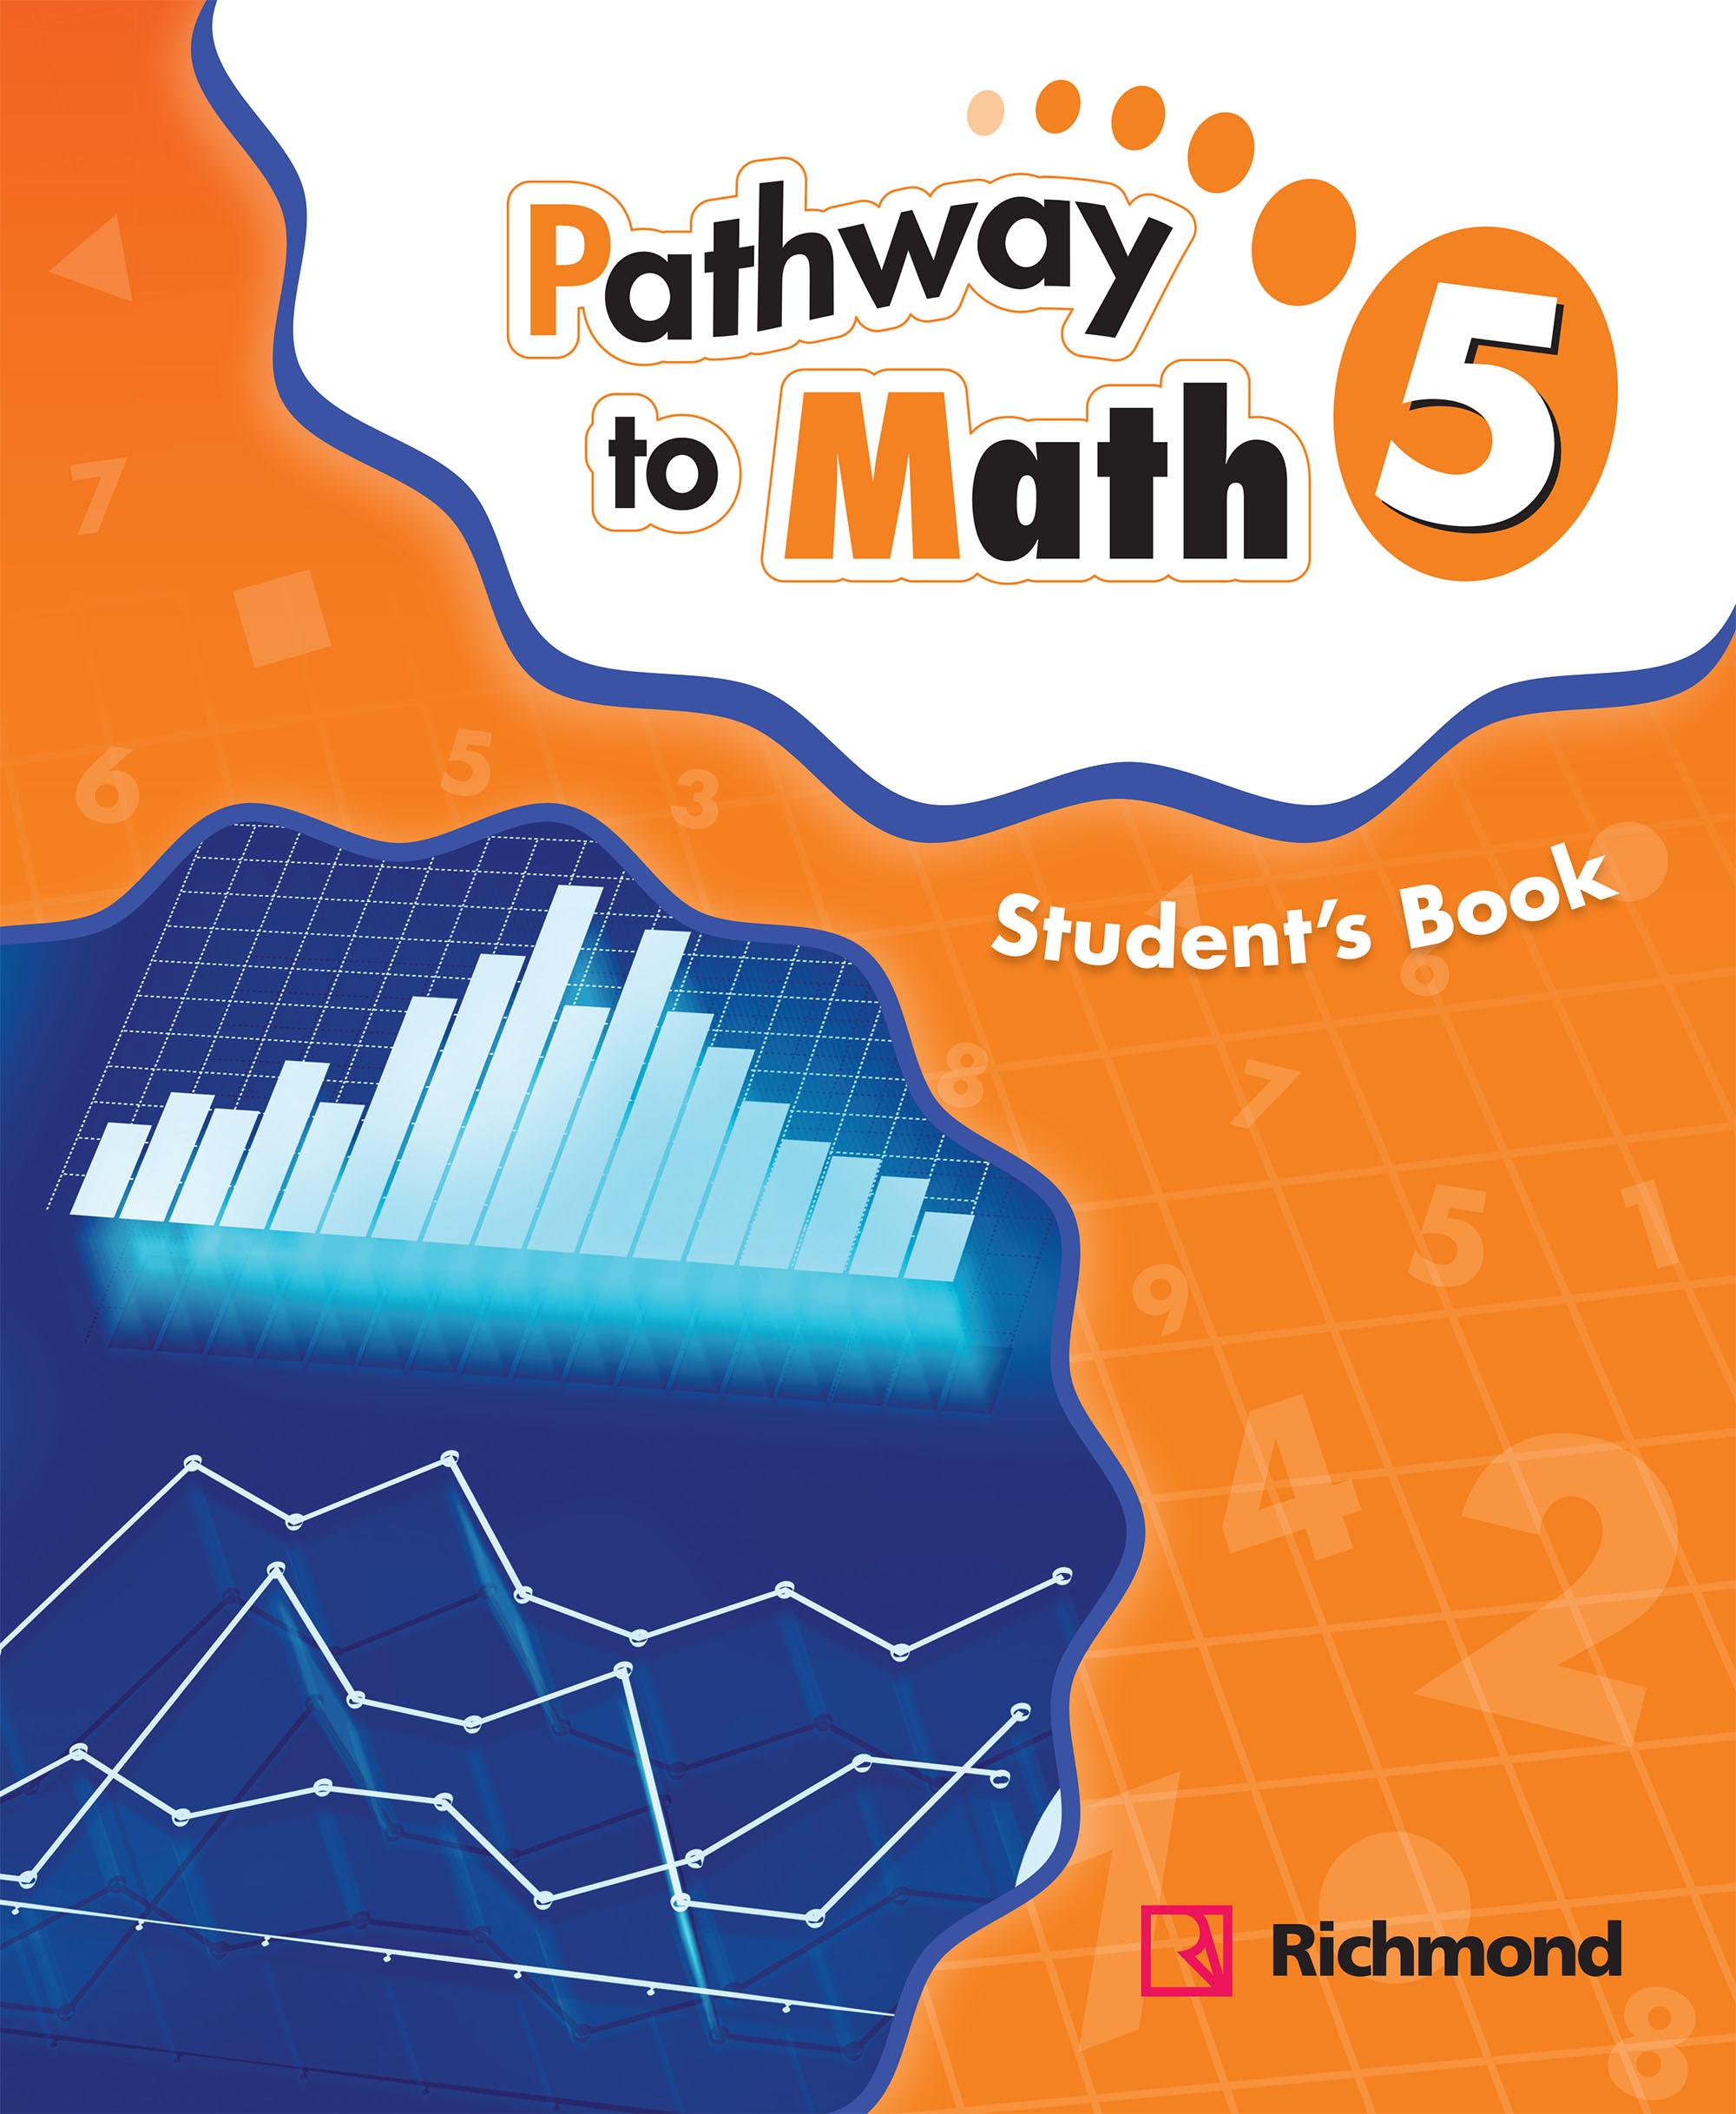 Pathway to Math 5 Student's Book